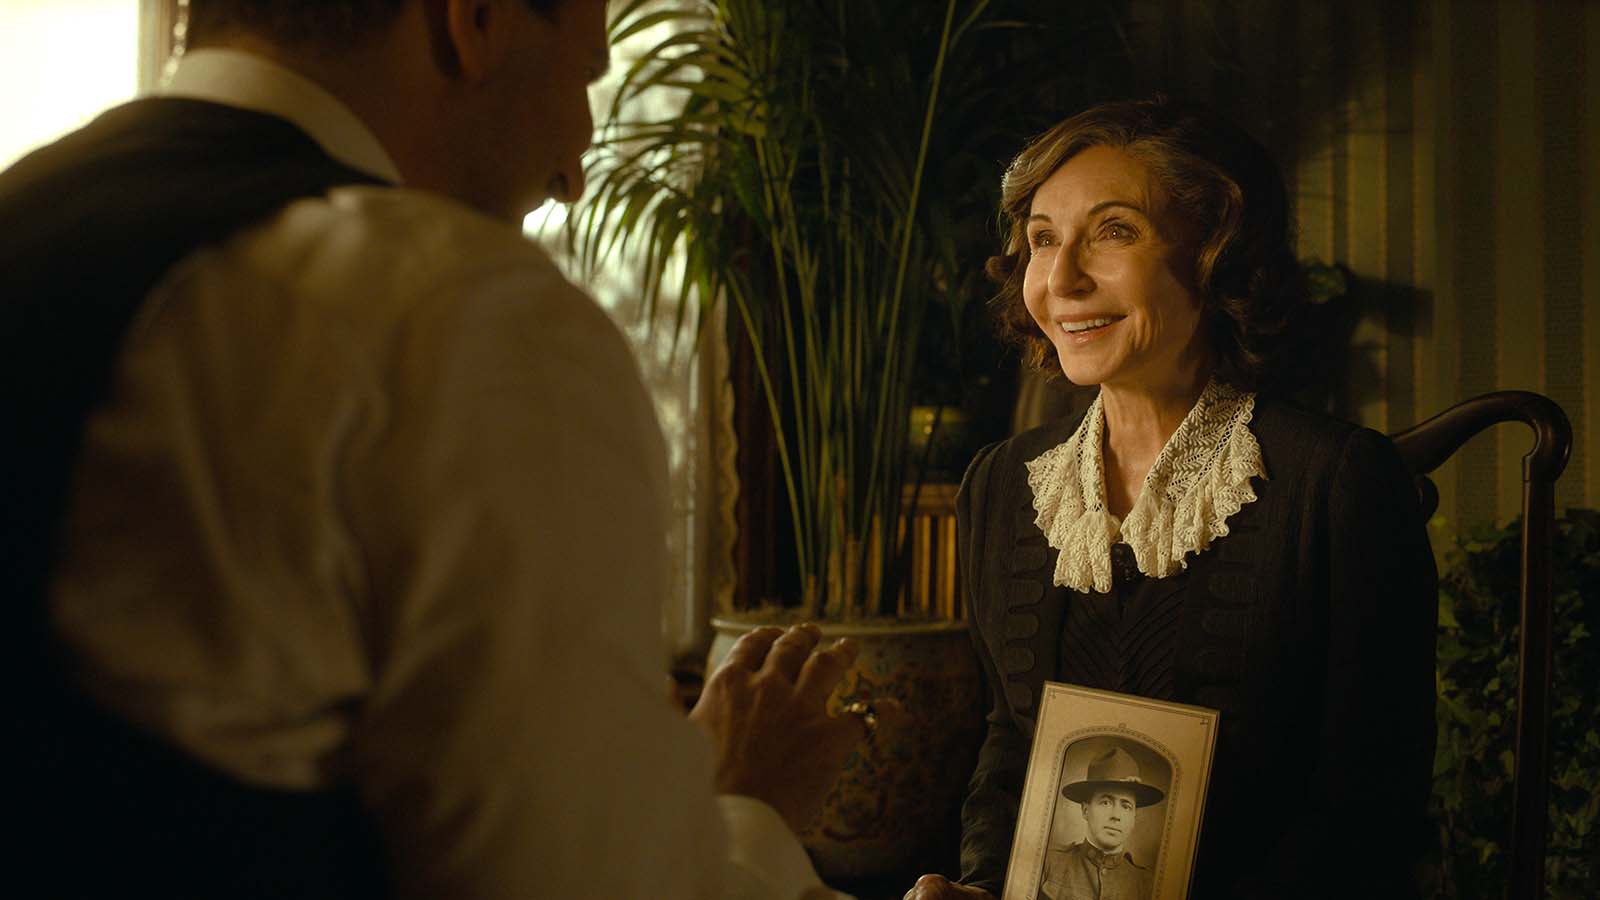 Mary Steenburgen plays Mrs. Kimball in Nightmare Alley. Image © Searchlight Pictures